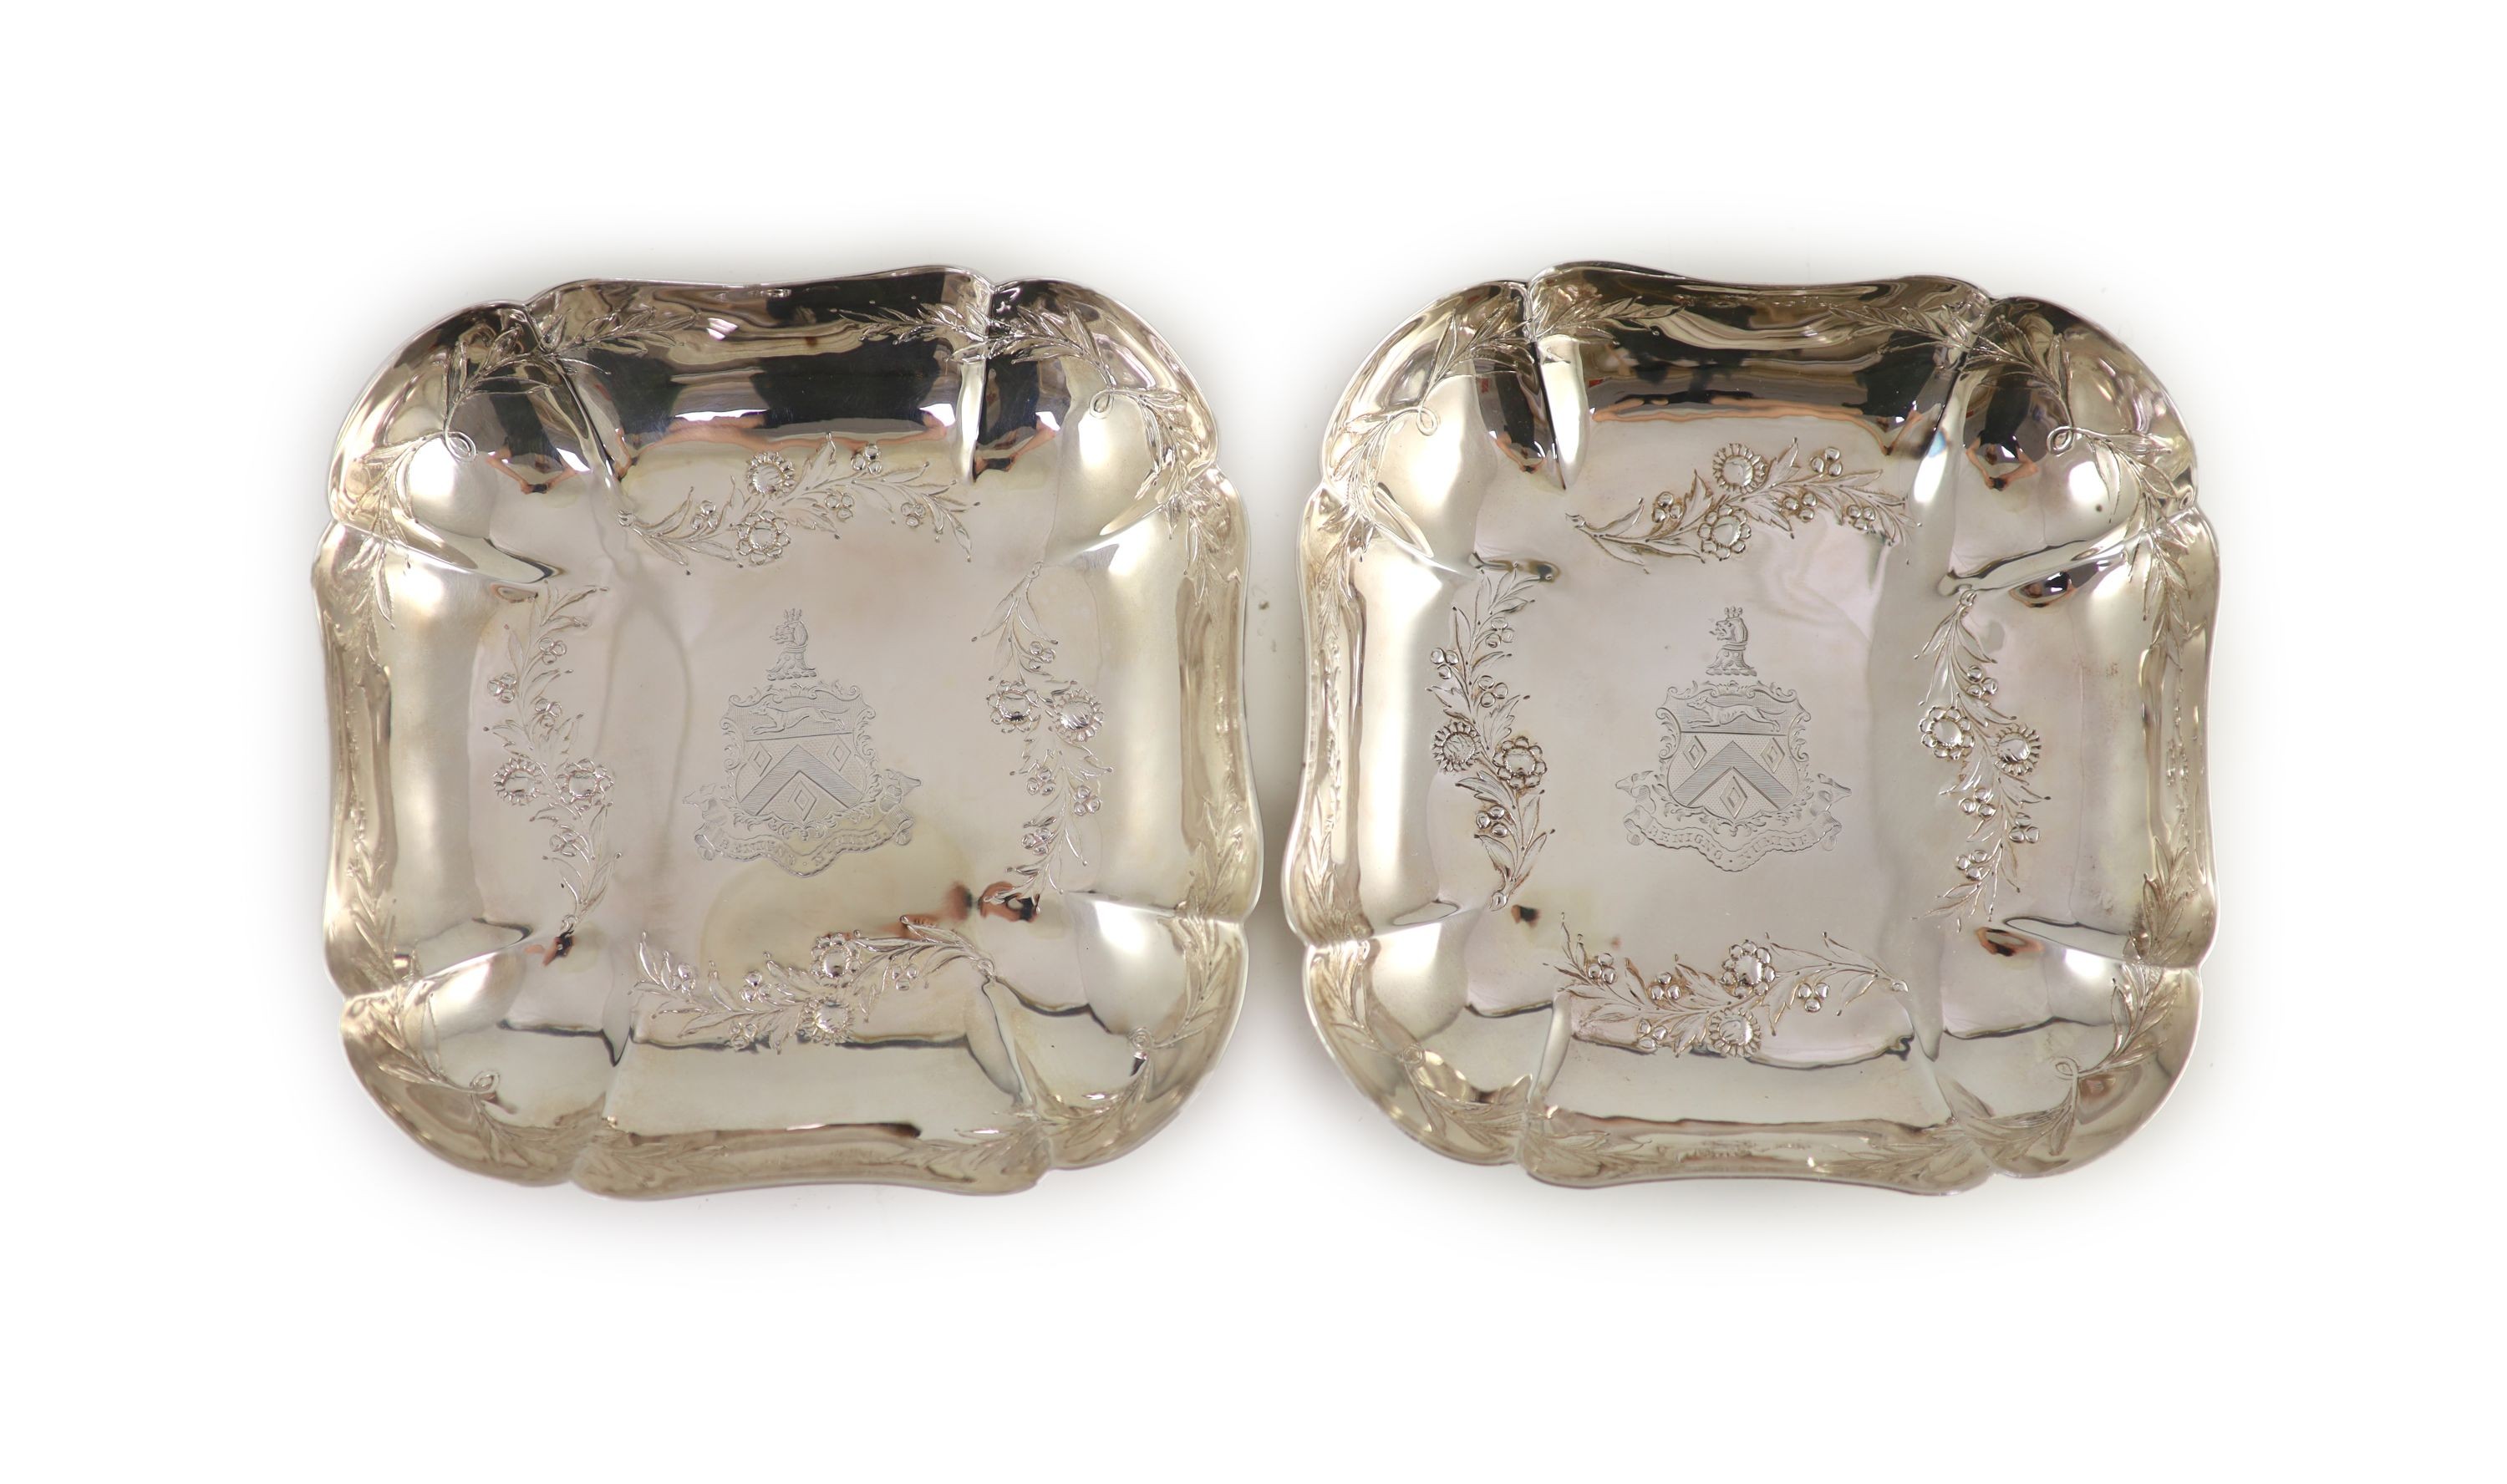 A pair of George III silver square shaped strawberry dishes, by John Mewburn